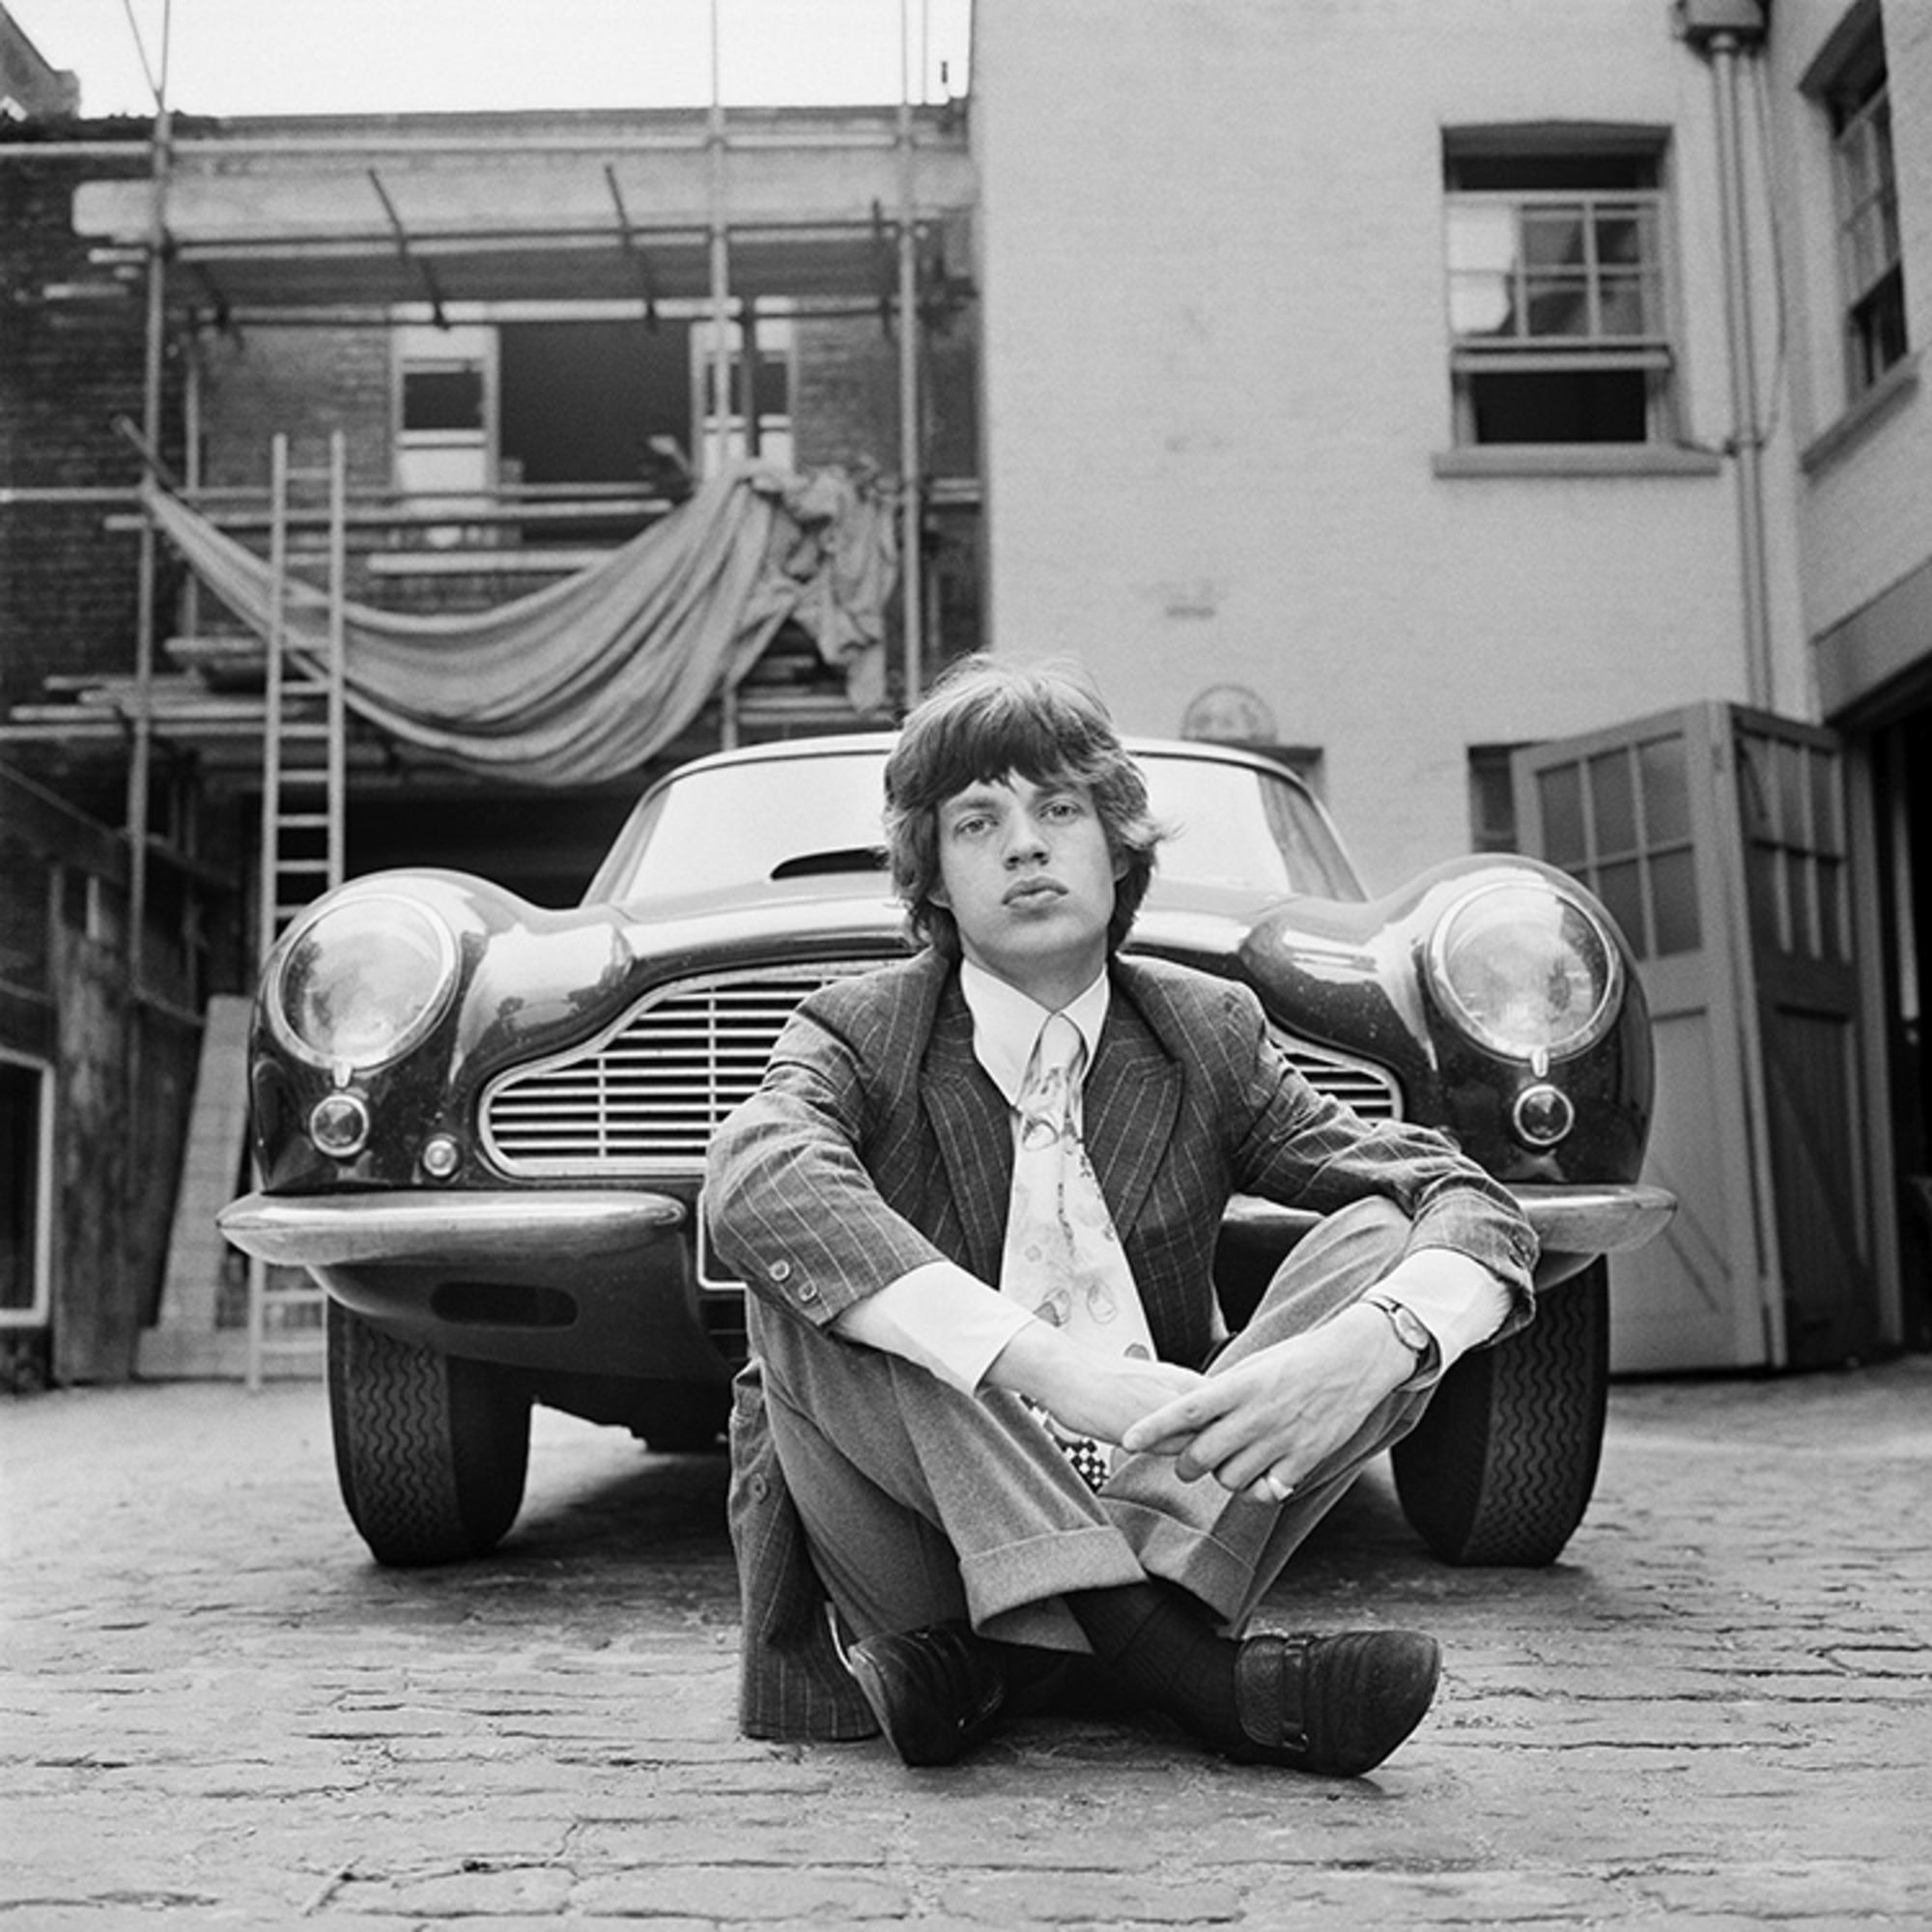 Gelatin-silver, signed and numbered

Mick Jagger of British rock band The Rolling Stones photographed next to an Aston Martin DB6 car in London, 1966.

Available Sizes:
16" x 20” Edition of 50
50” x 53” Edition of 24

This photograph will be printed